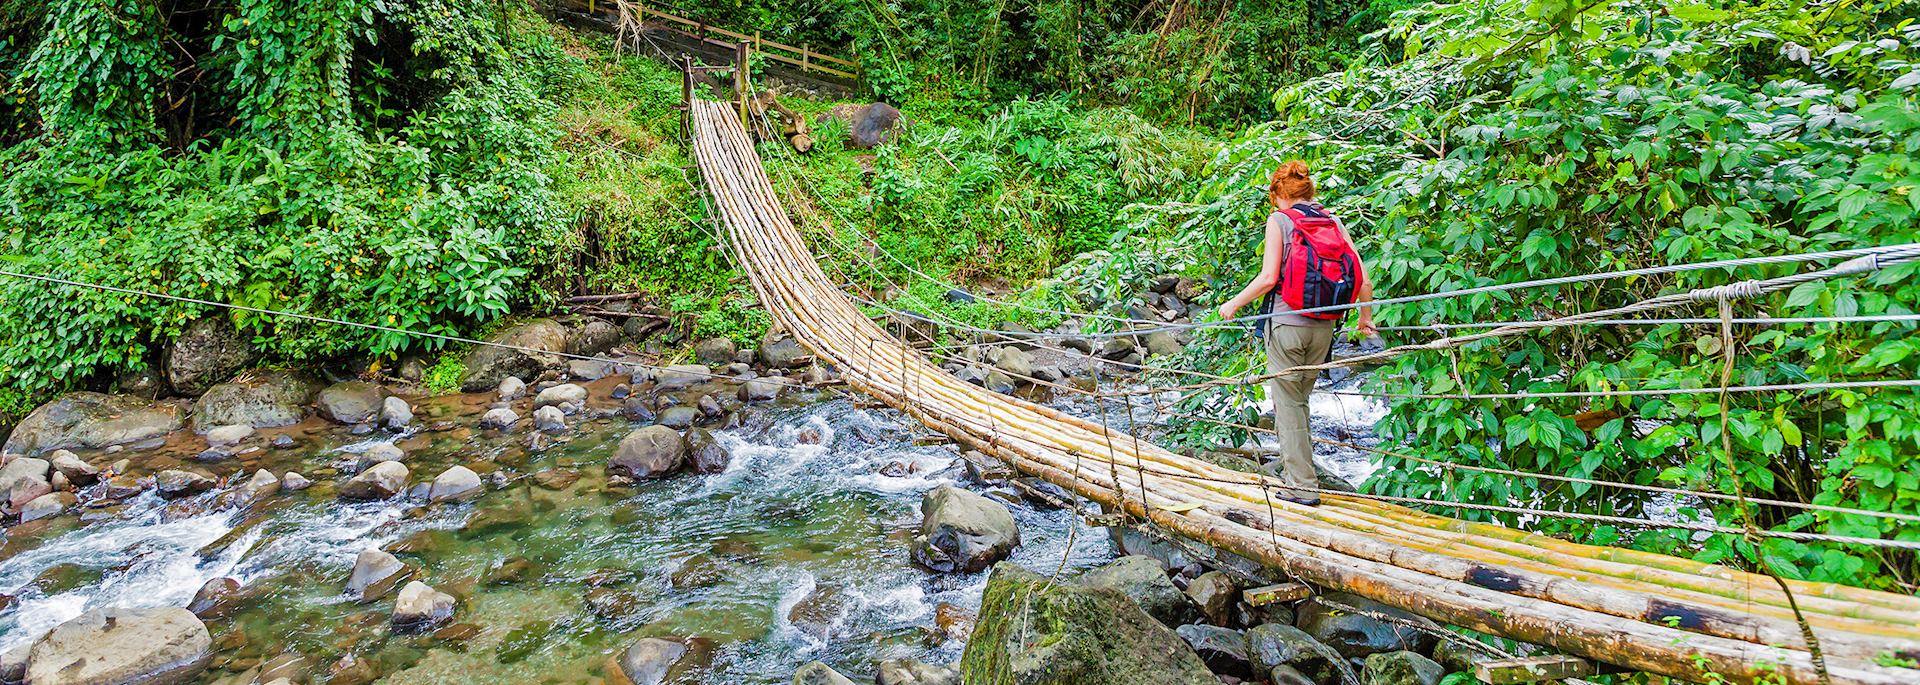 Crossing a bamboo bridge, St Vincent and the Grenadines